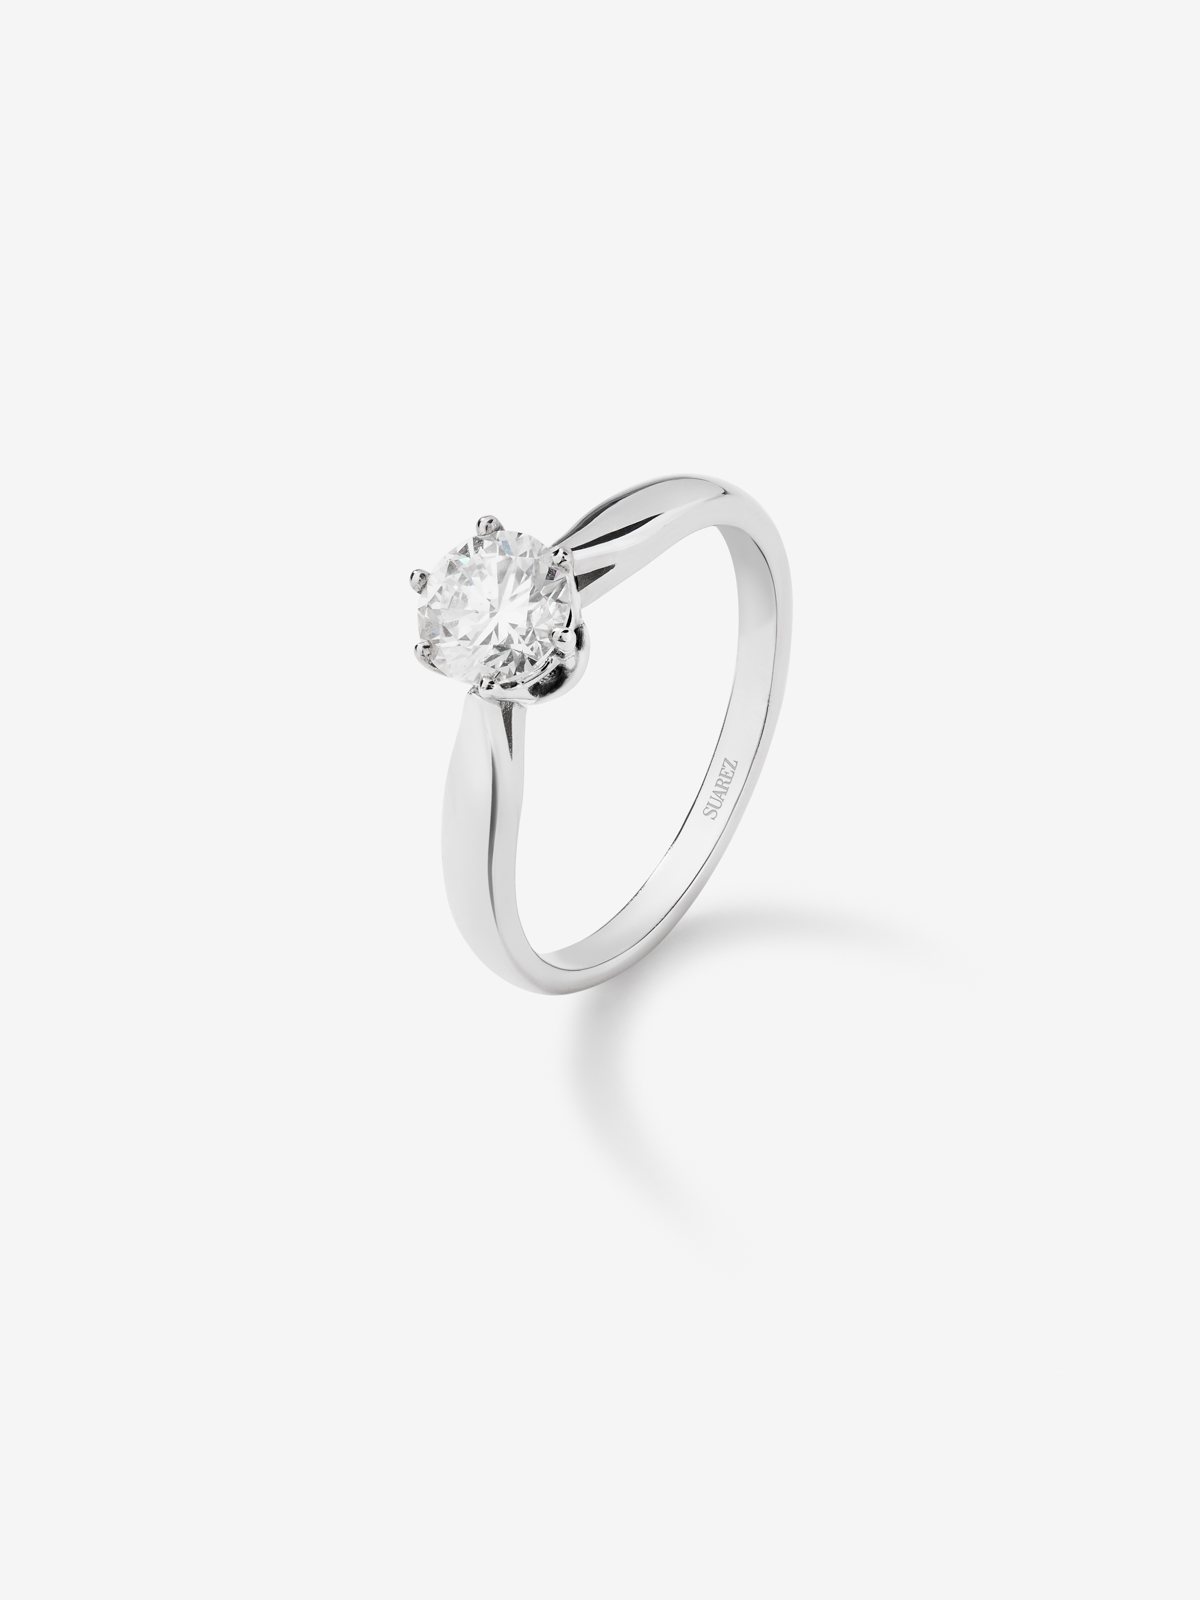 18K white gold compromise ring with 0.4 carat central diamond